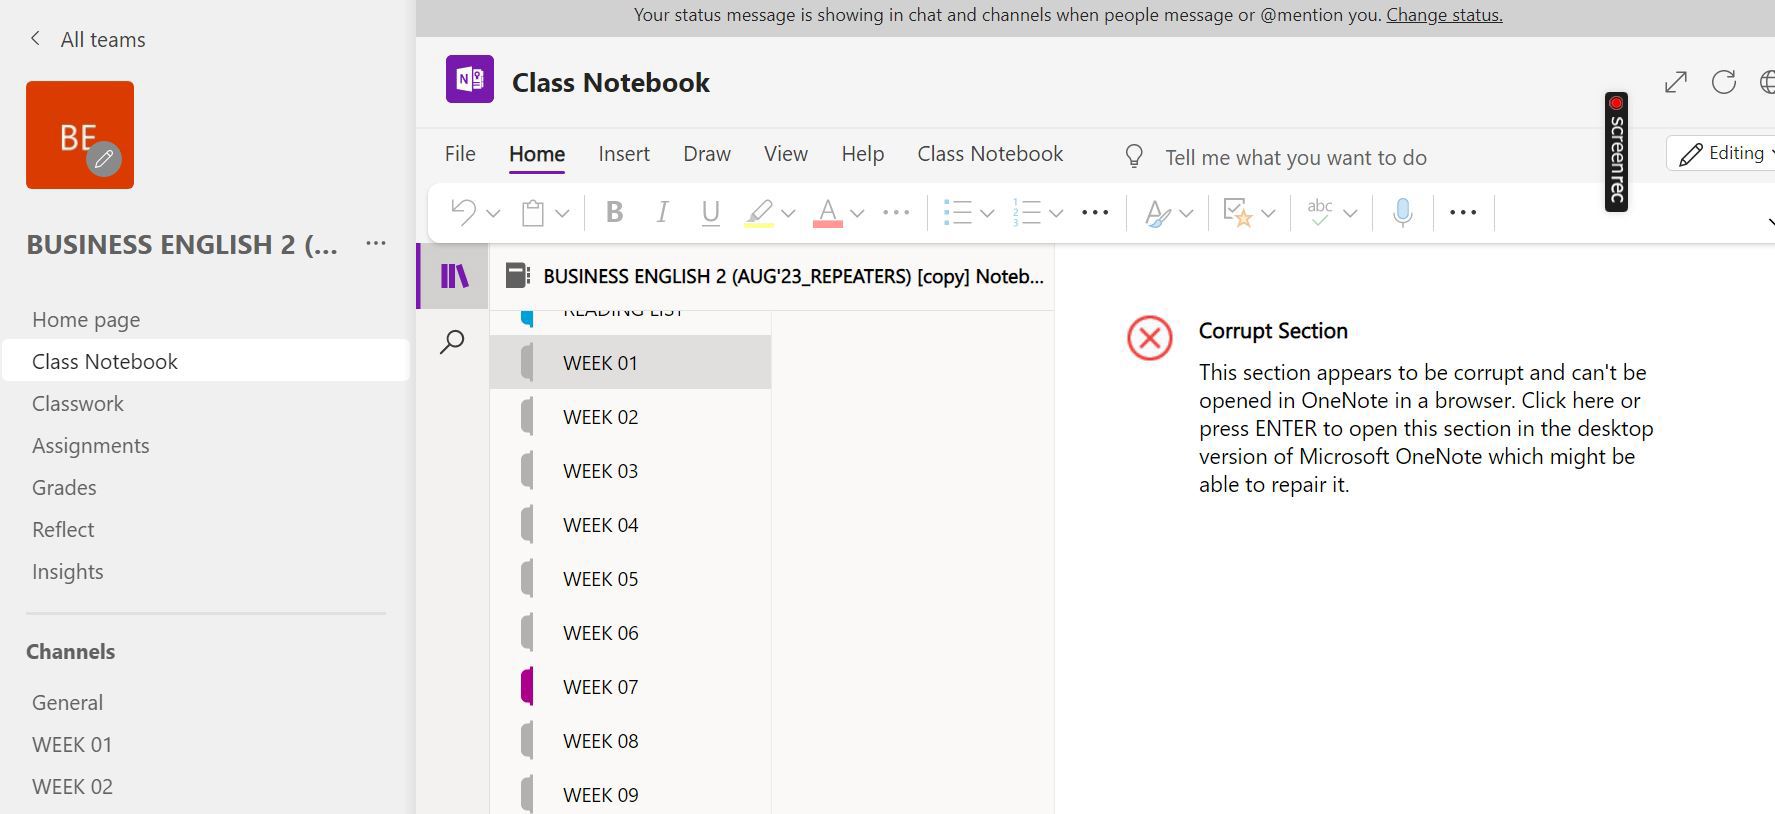 OneNote in Teams-Corrupt Section message